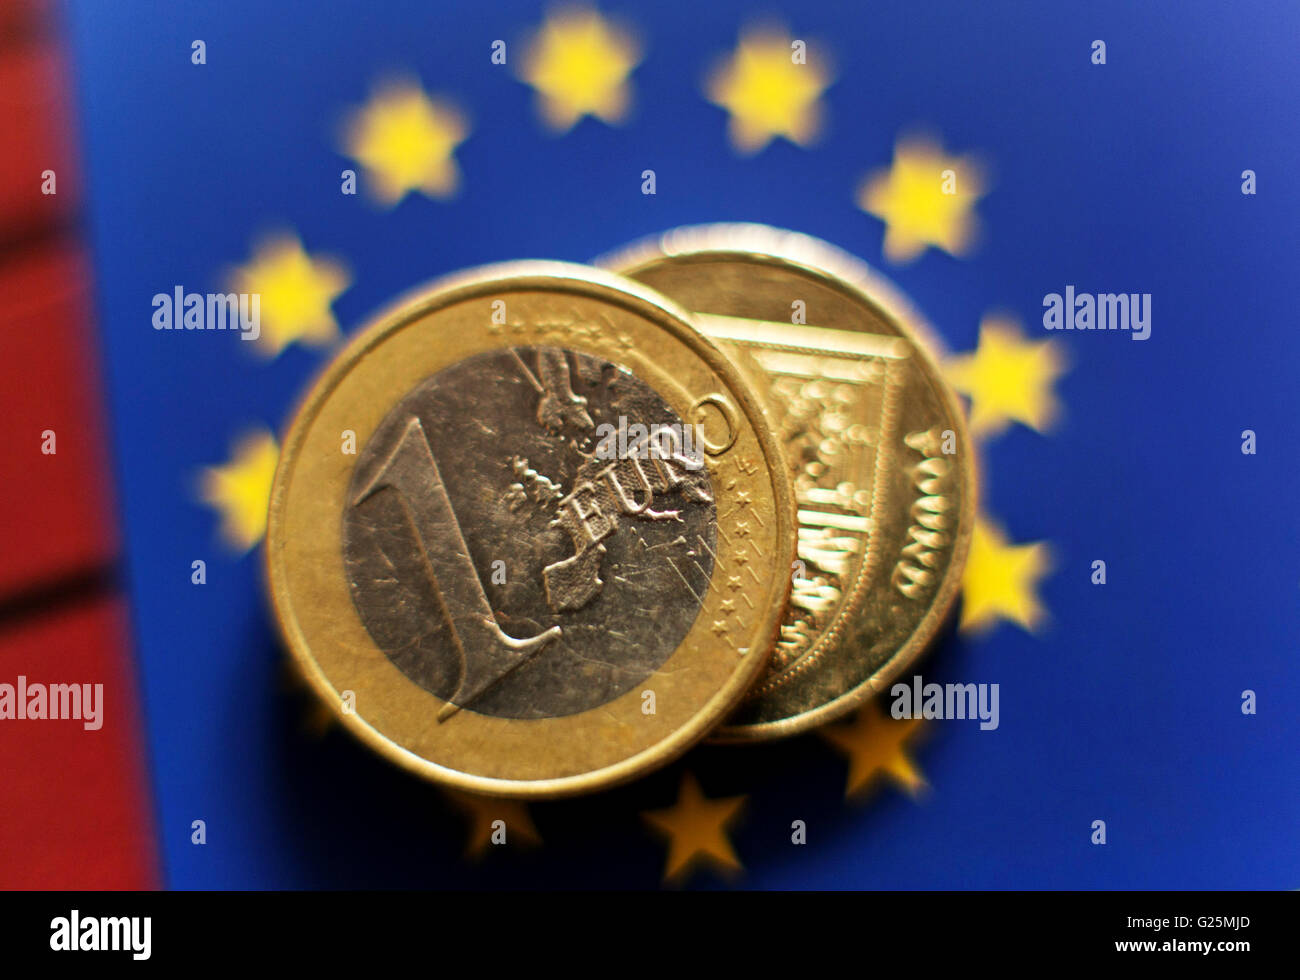 A 1 euro coin and a One Pound coin placed on a backdrop of The European flag, in London. Stock Photo